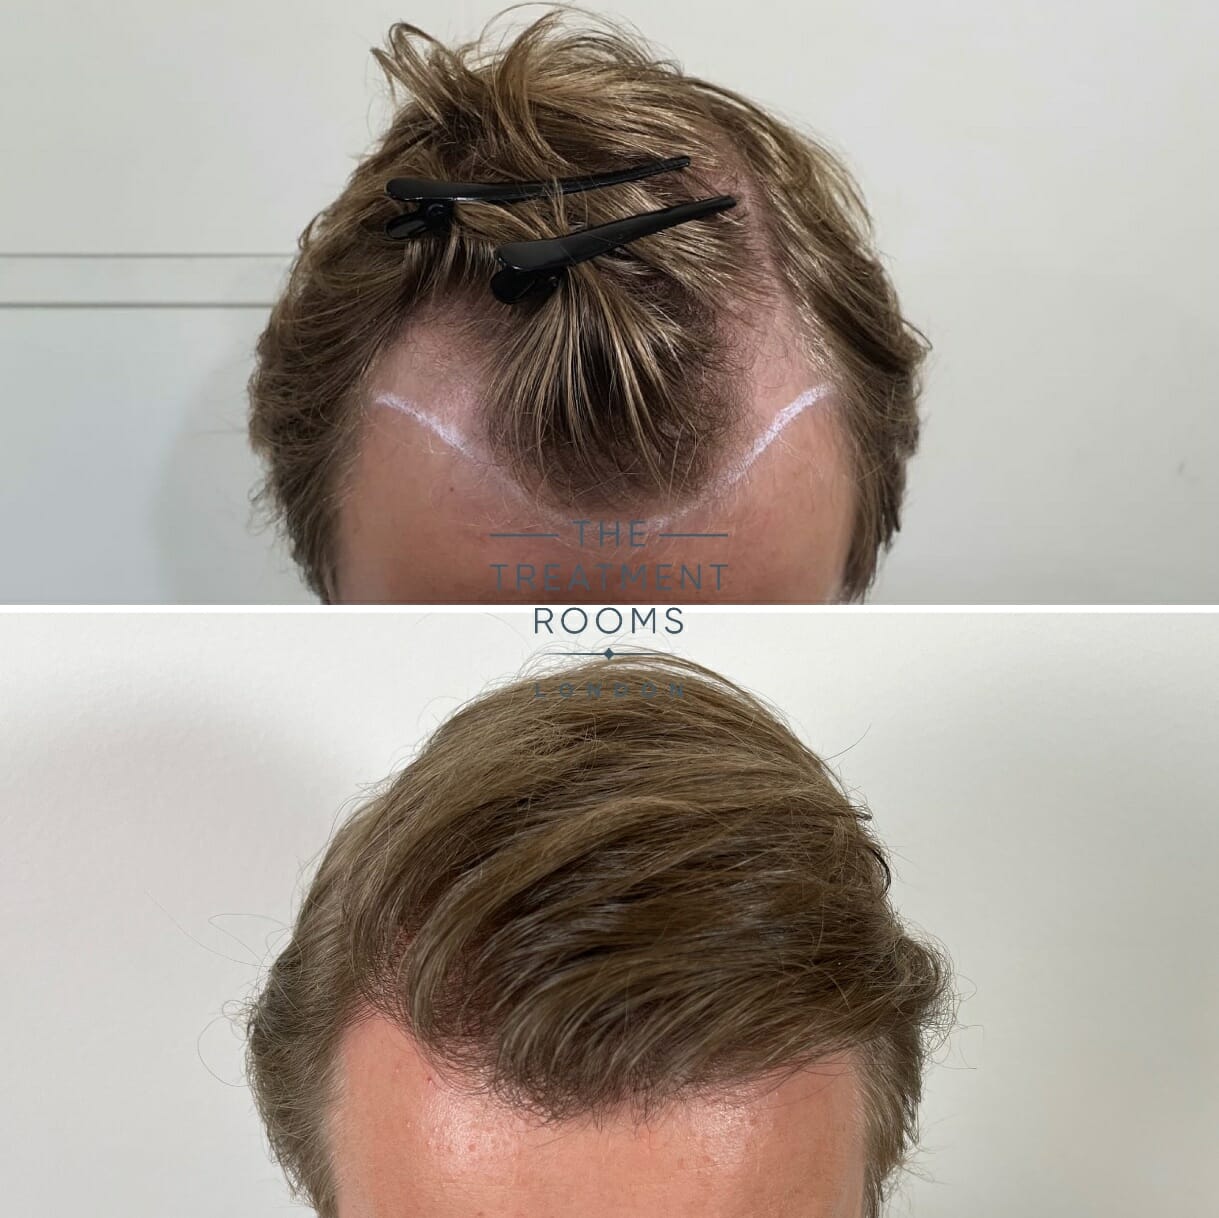 Solve Clinics  Hair Transplant Results FUE method 2000 grafts   PRP   11 months postop final results can be expected in 1215 months  Minimally invasive natural  permanent results Schedule